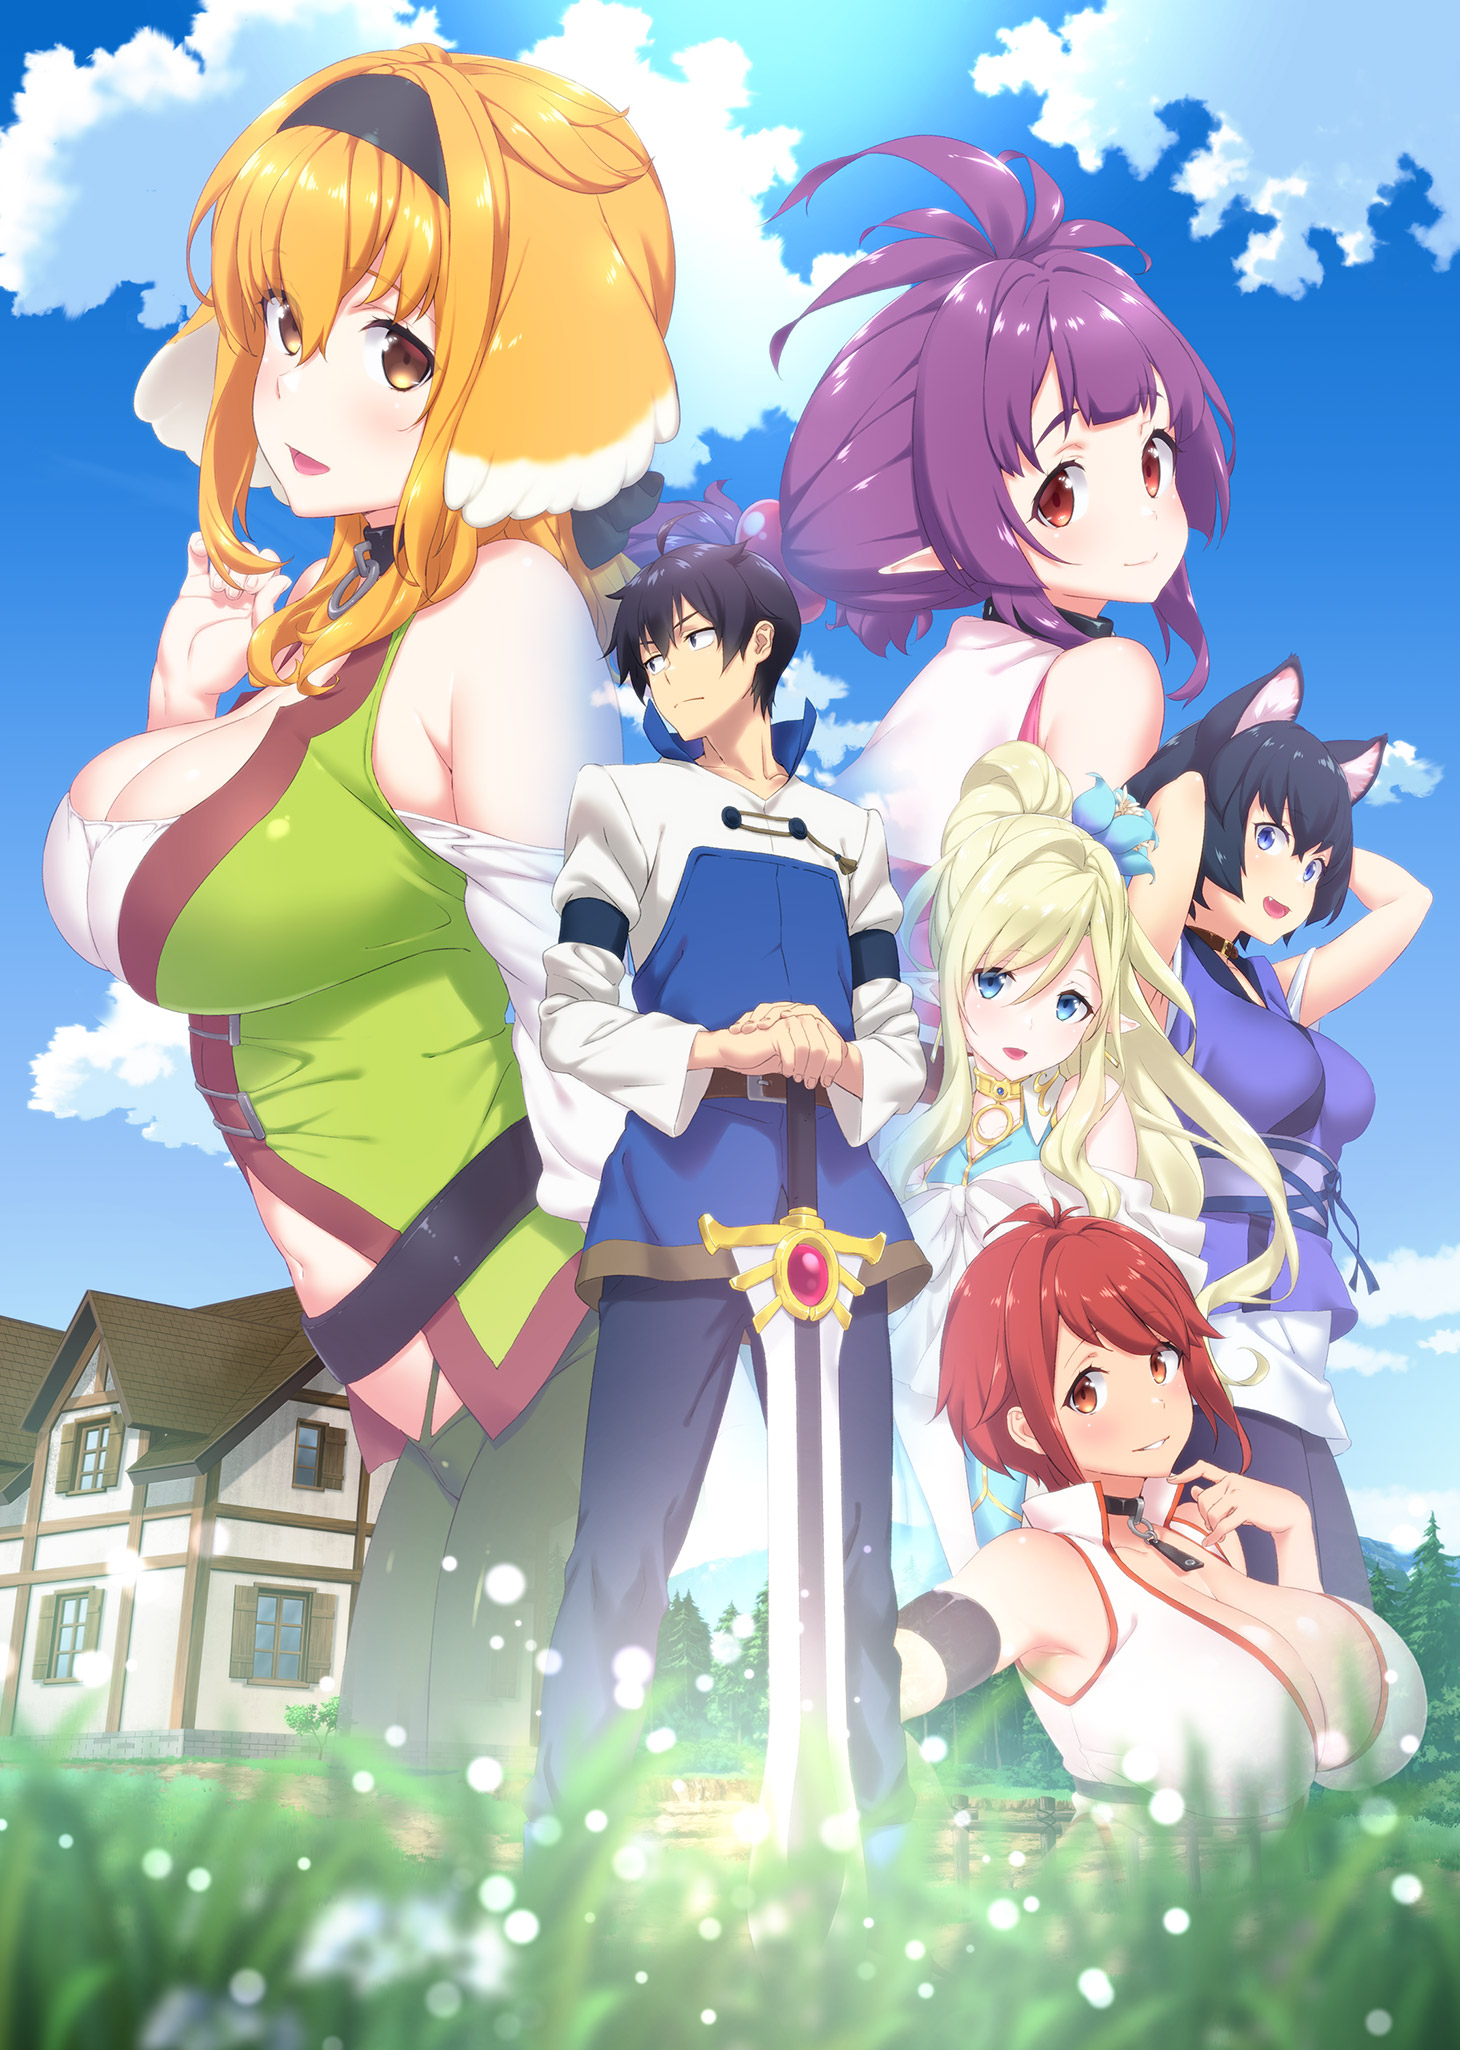 Harem in the Labyrinth of Another World Anime - New Key Visual